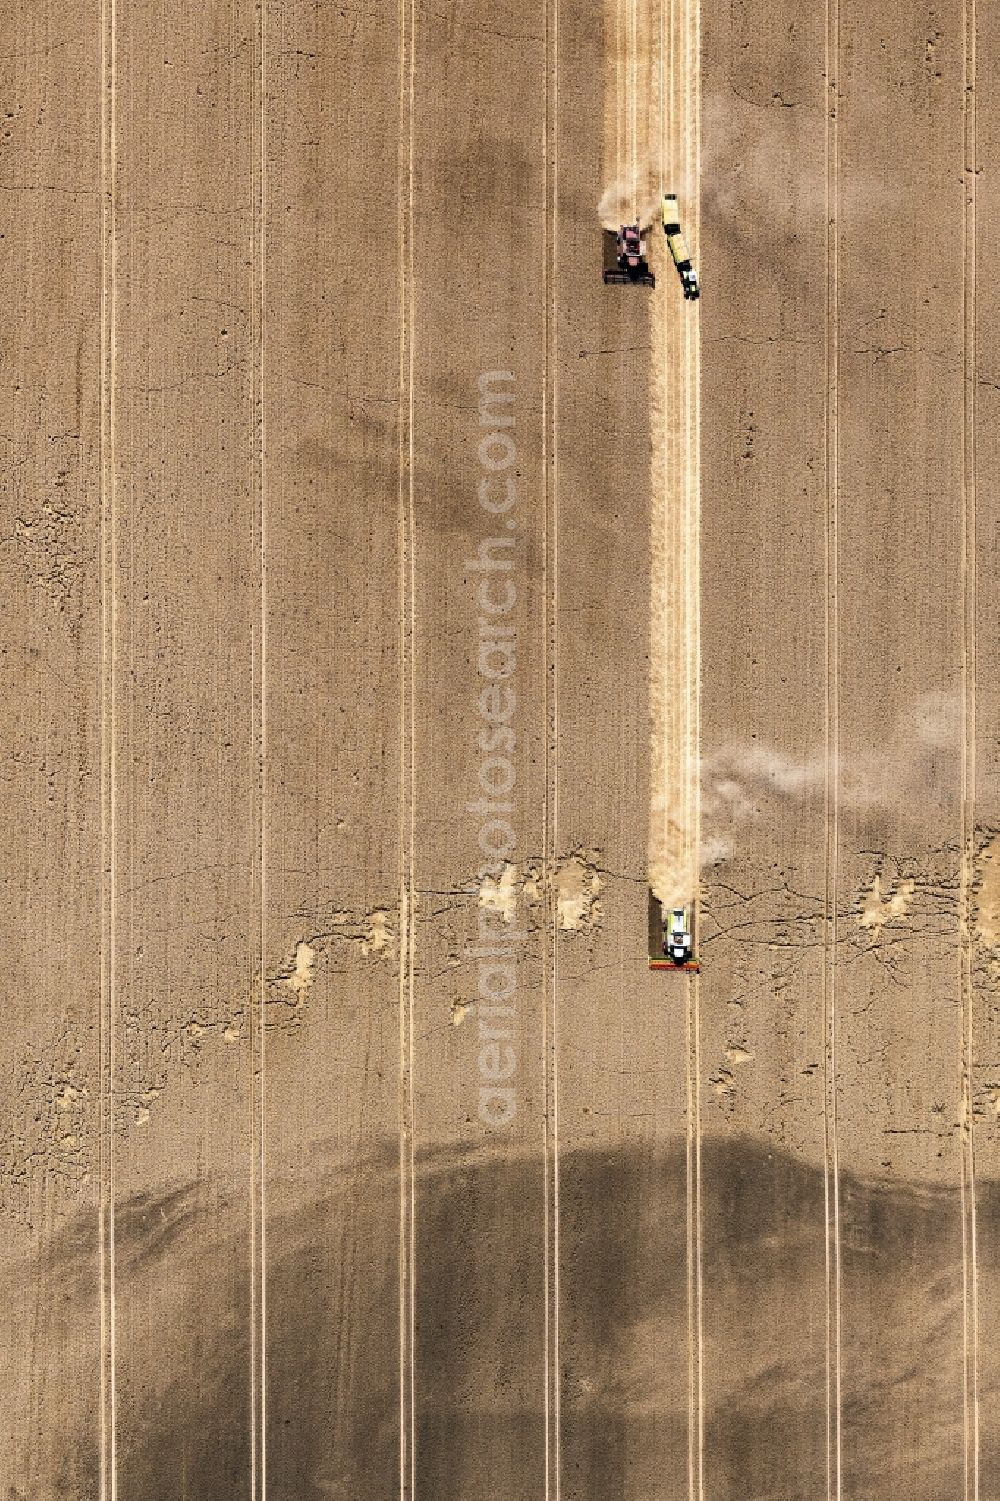 Vertical aerial photograph Bad Düben - Vertical aerial view from the satellite perspective of the harvest use of heavy agricultural machinery - combine harvesters and harvesting vehicles on agricultural fields in Bad Dueben in the state Saxony, Germany